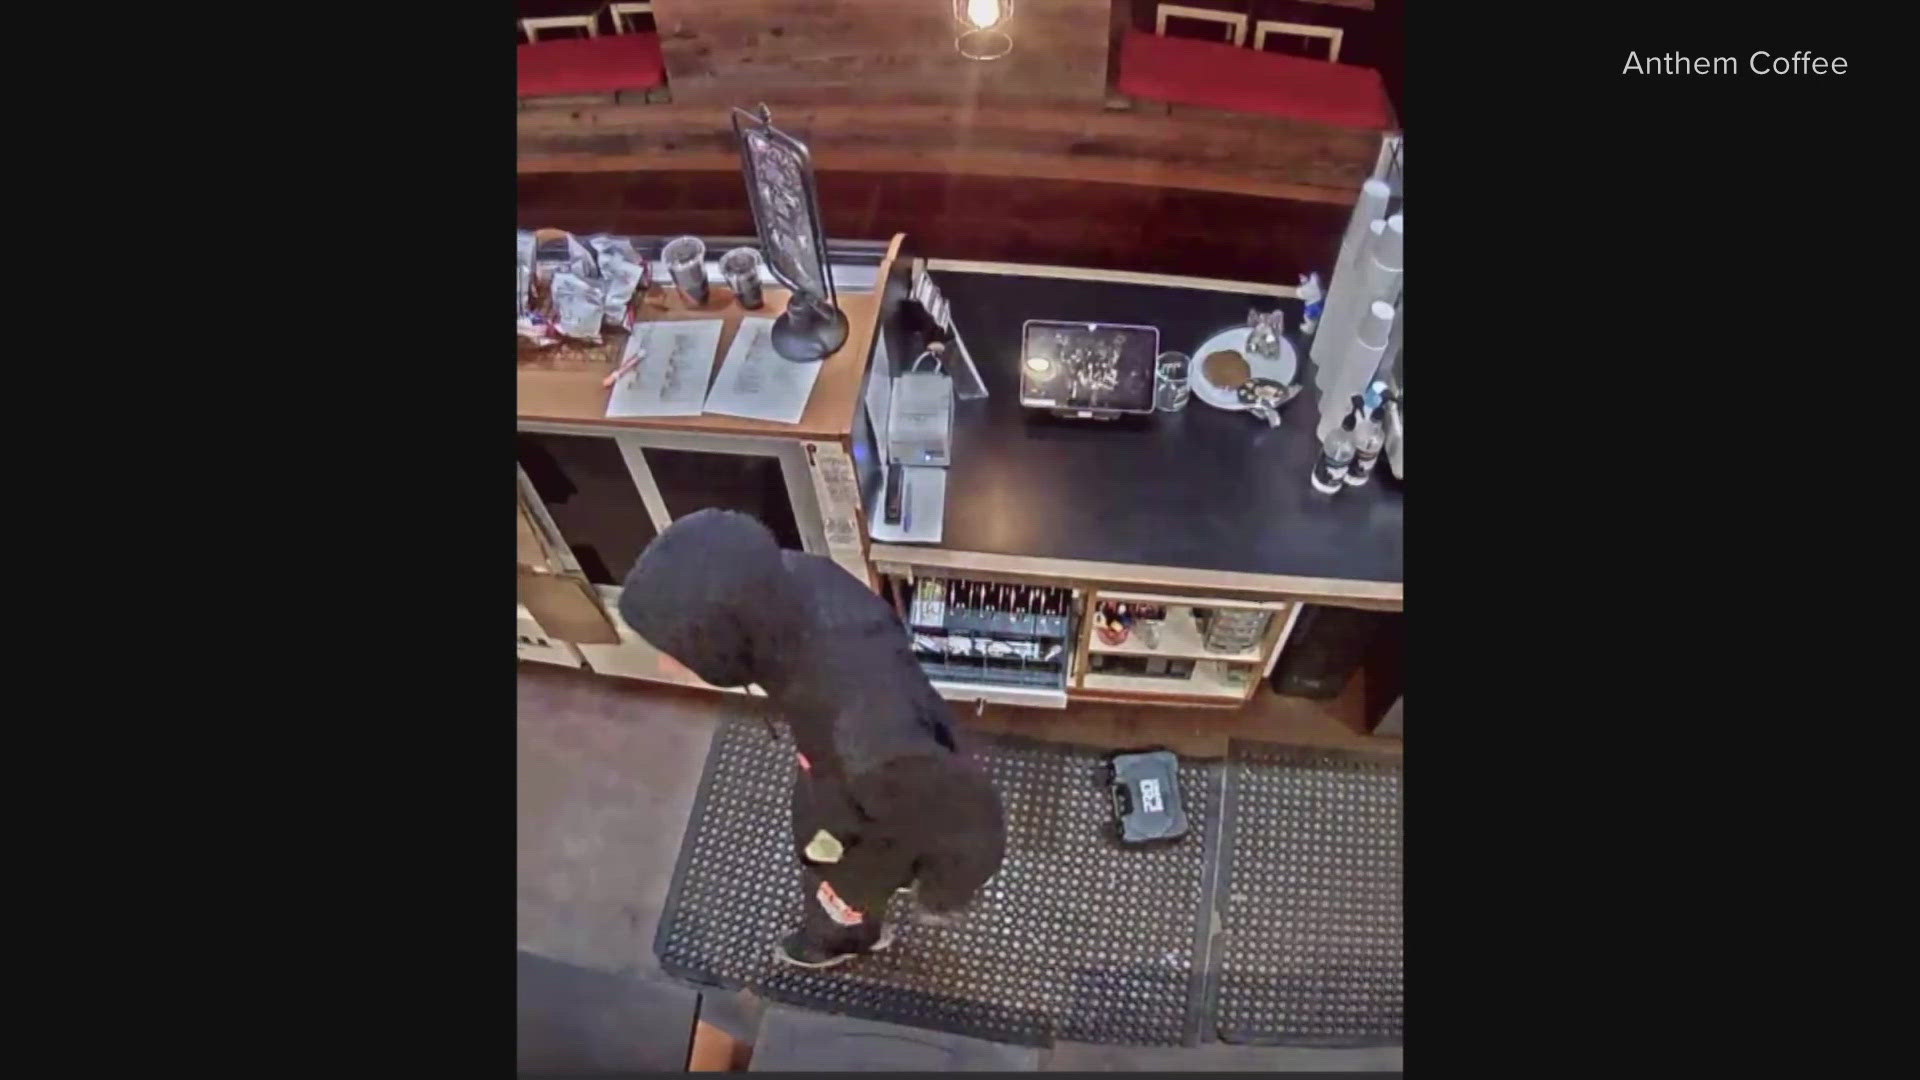 The crimes at Anthem Coffee’s Sunrise Medical location in South Hill were all caught on video and now authorities are trying to figure out who the suspect is.